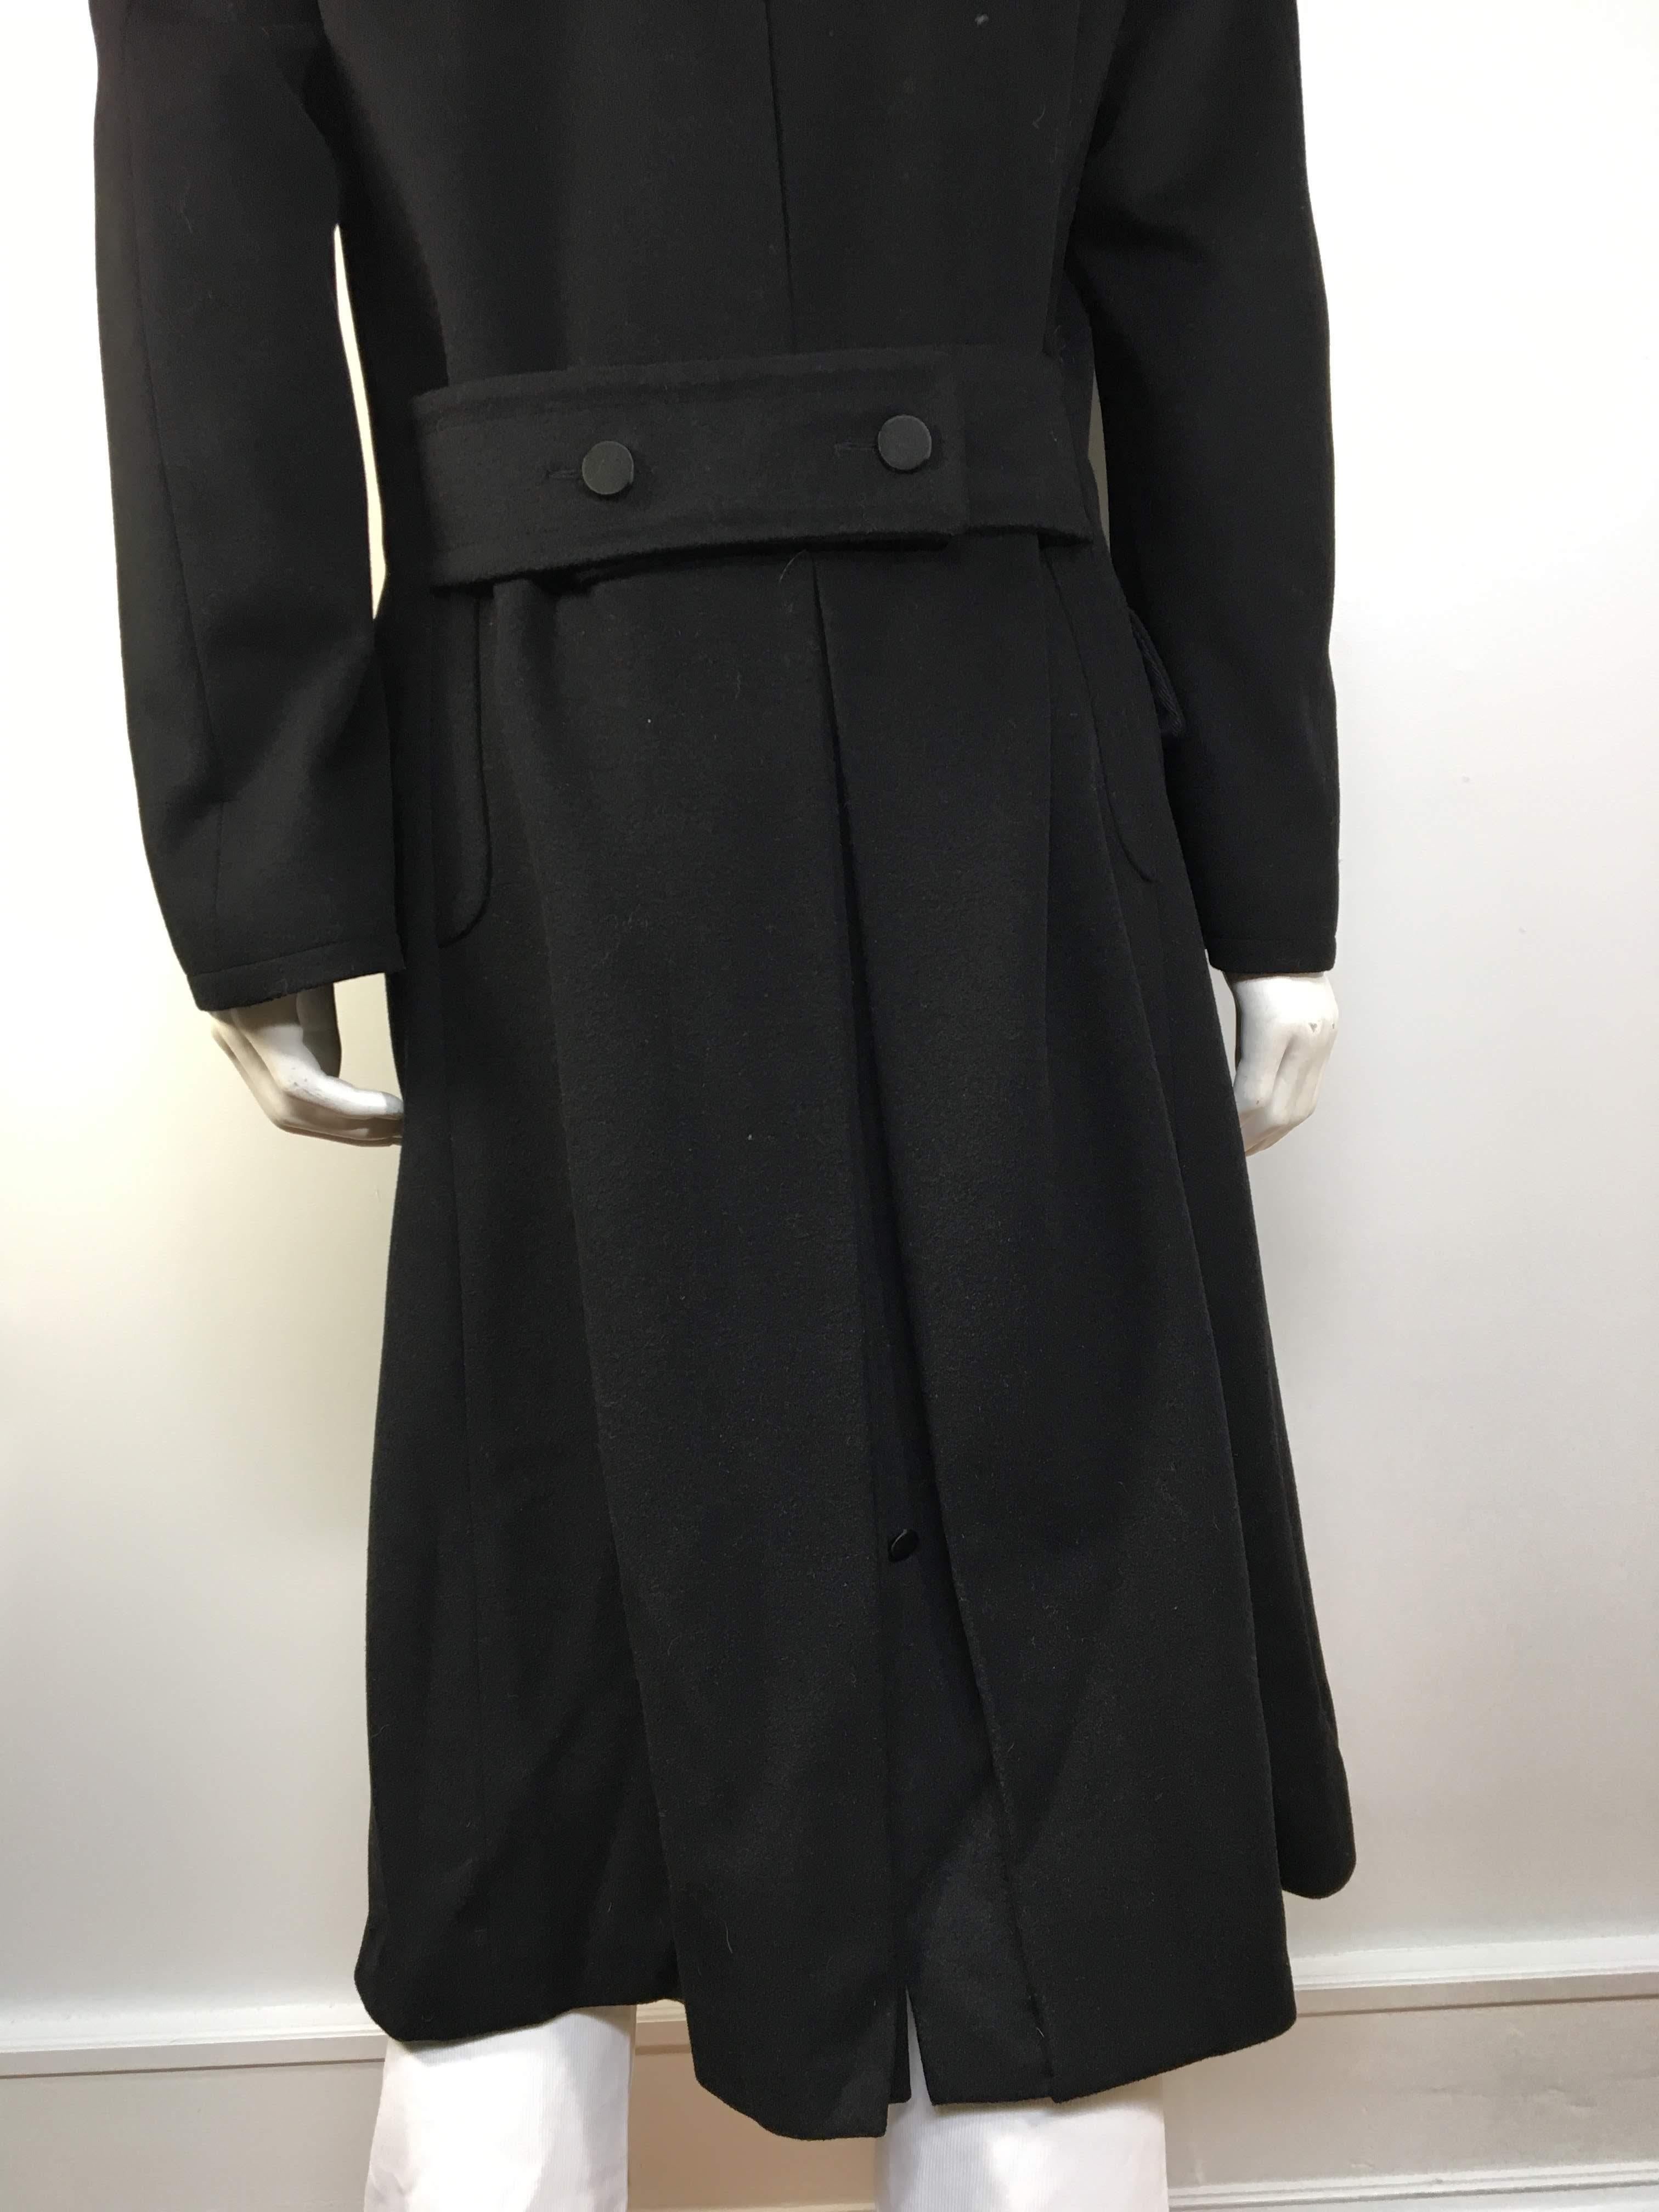 Men's Gucci Black Wool & Cashmere Trench Coat 6